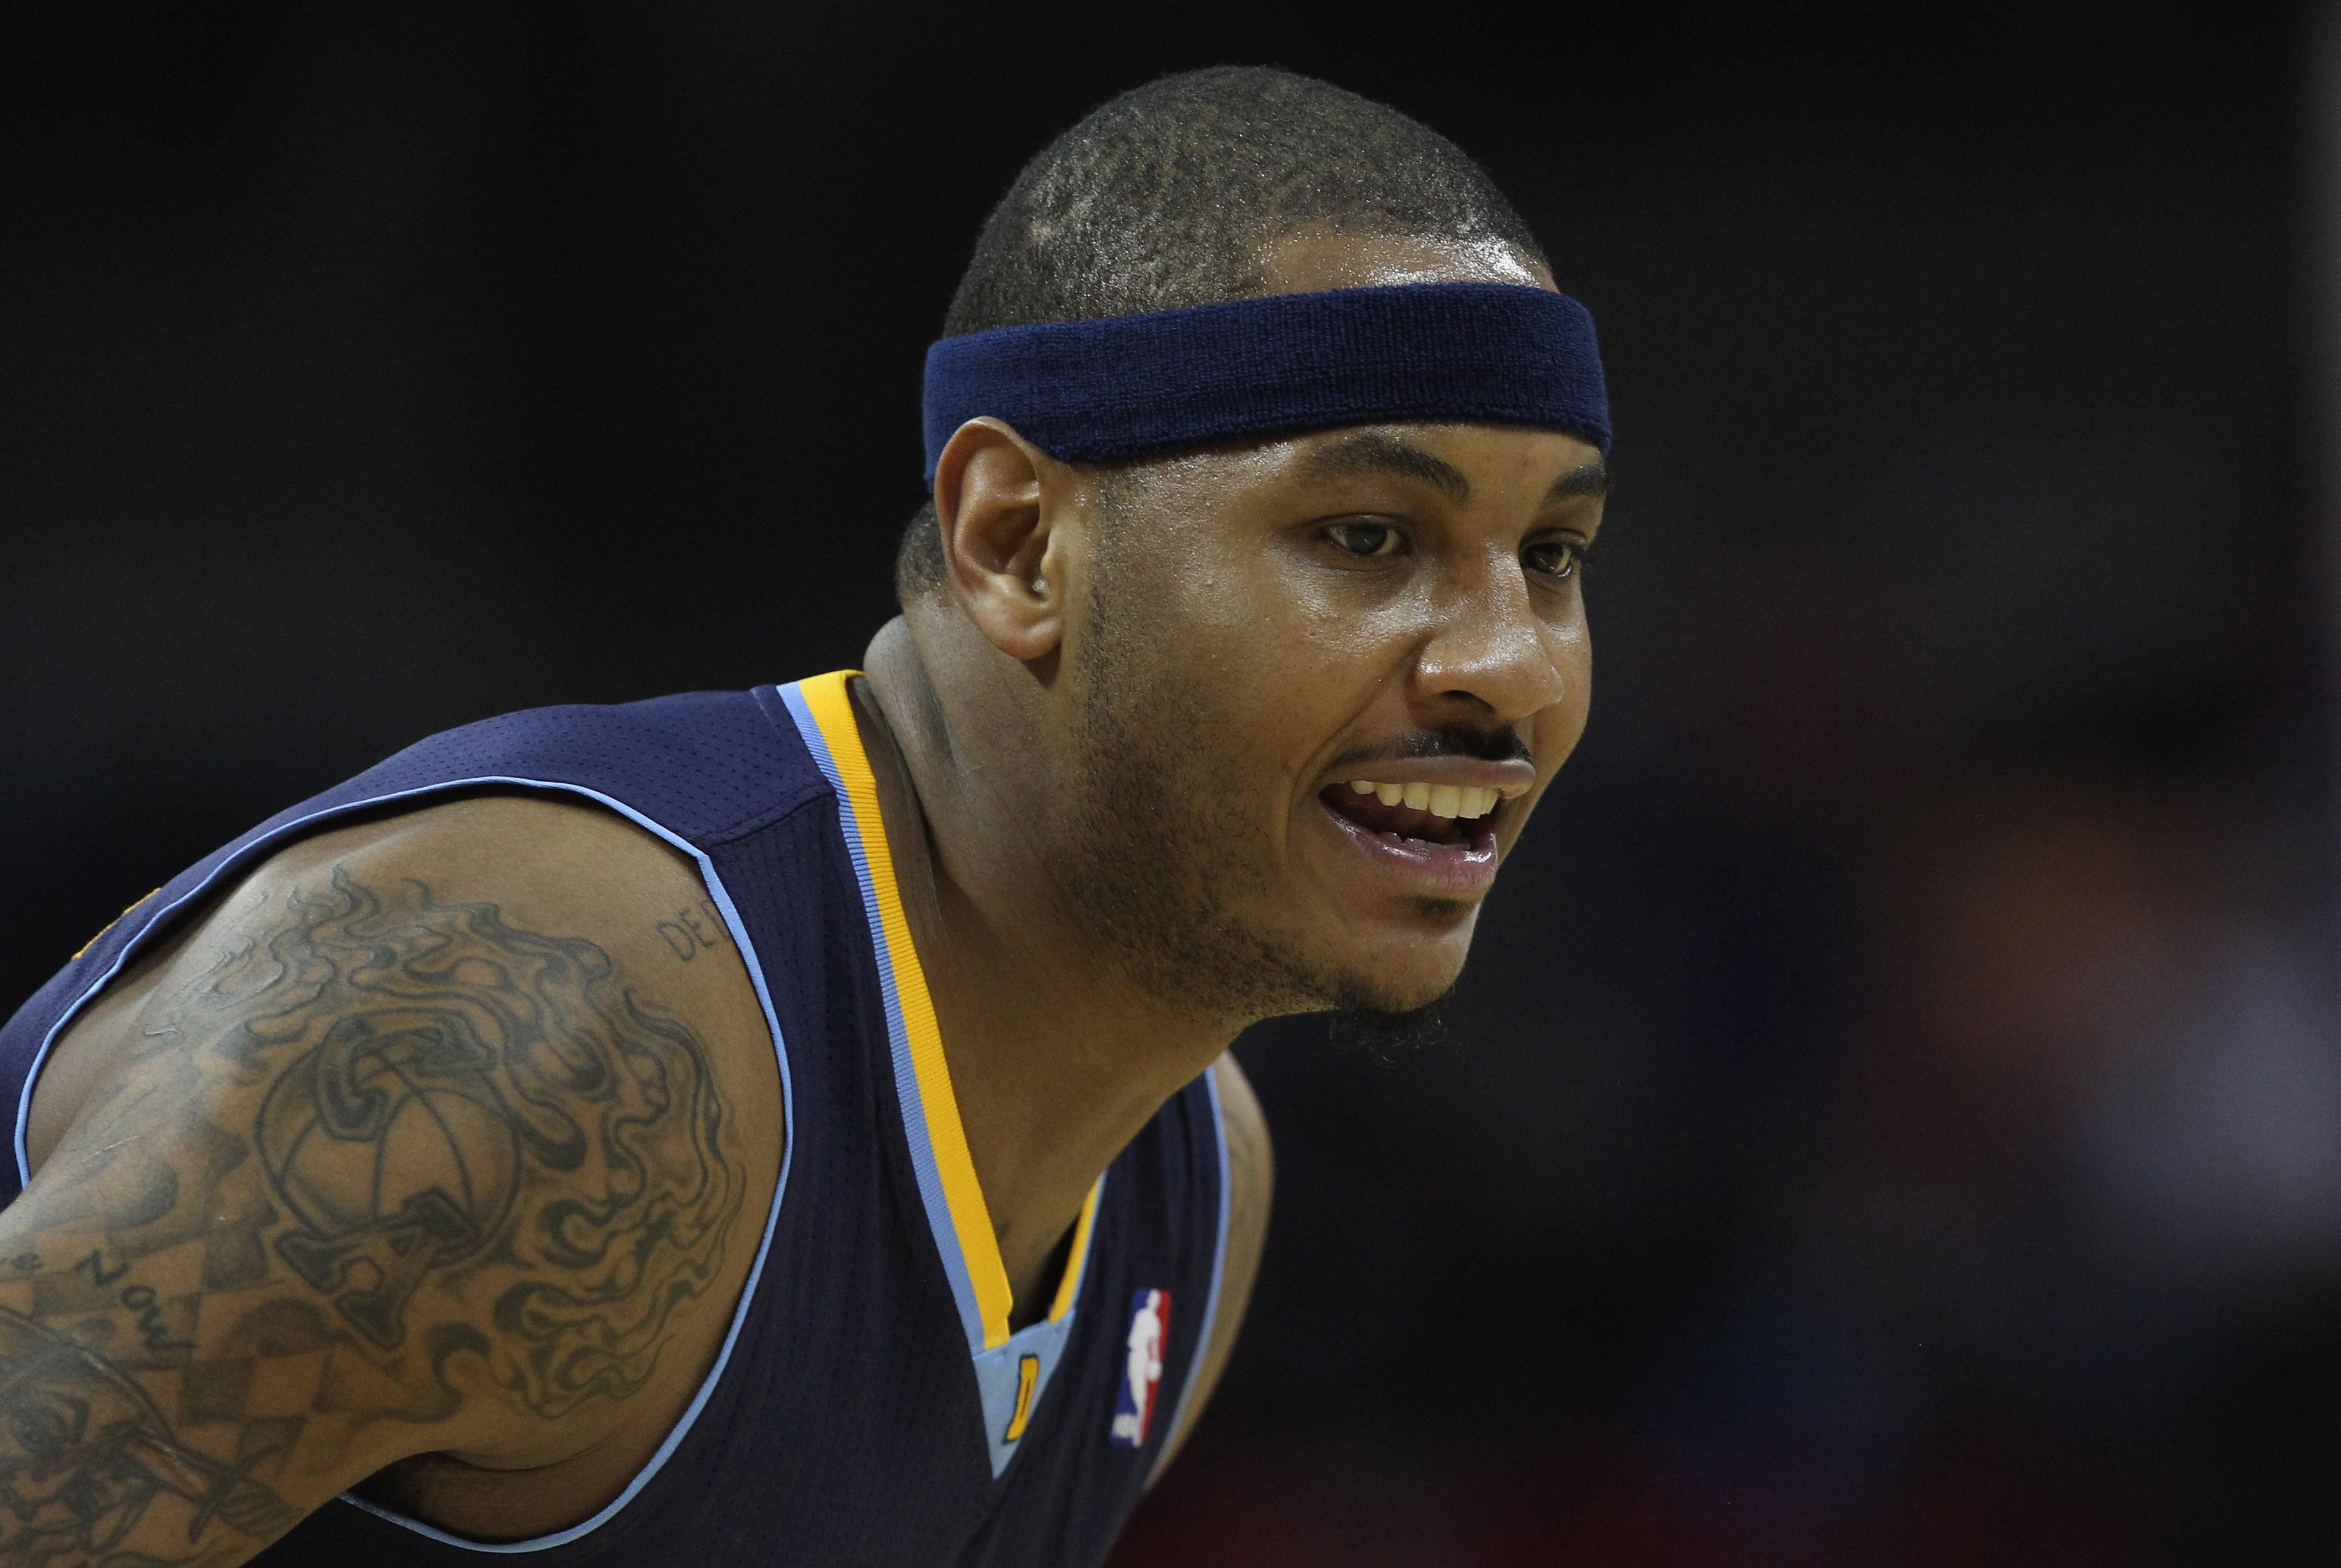 Carmelo Anthony wanted to play for Detroit Pistons